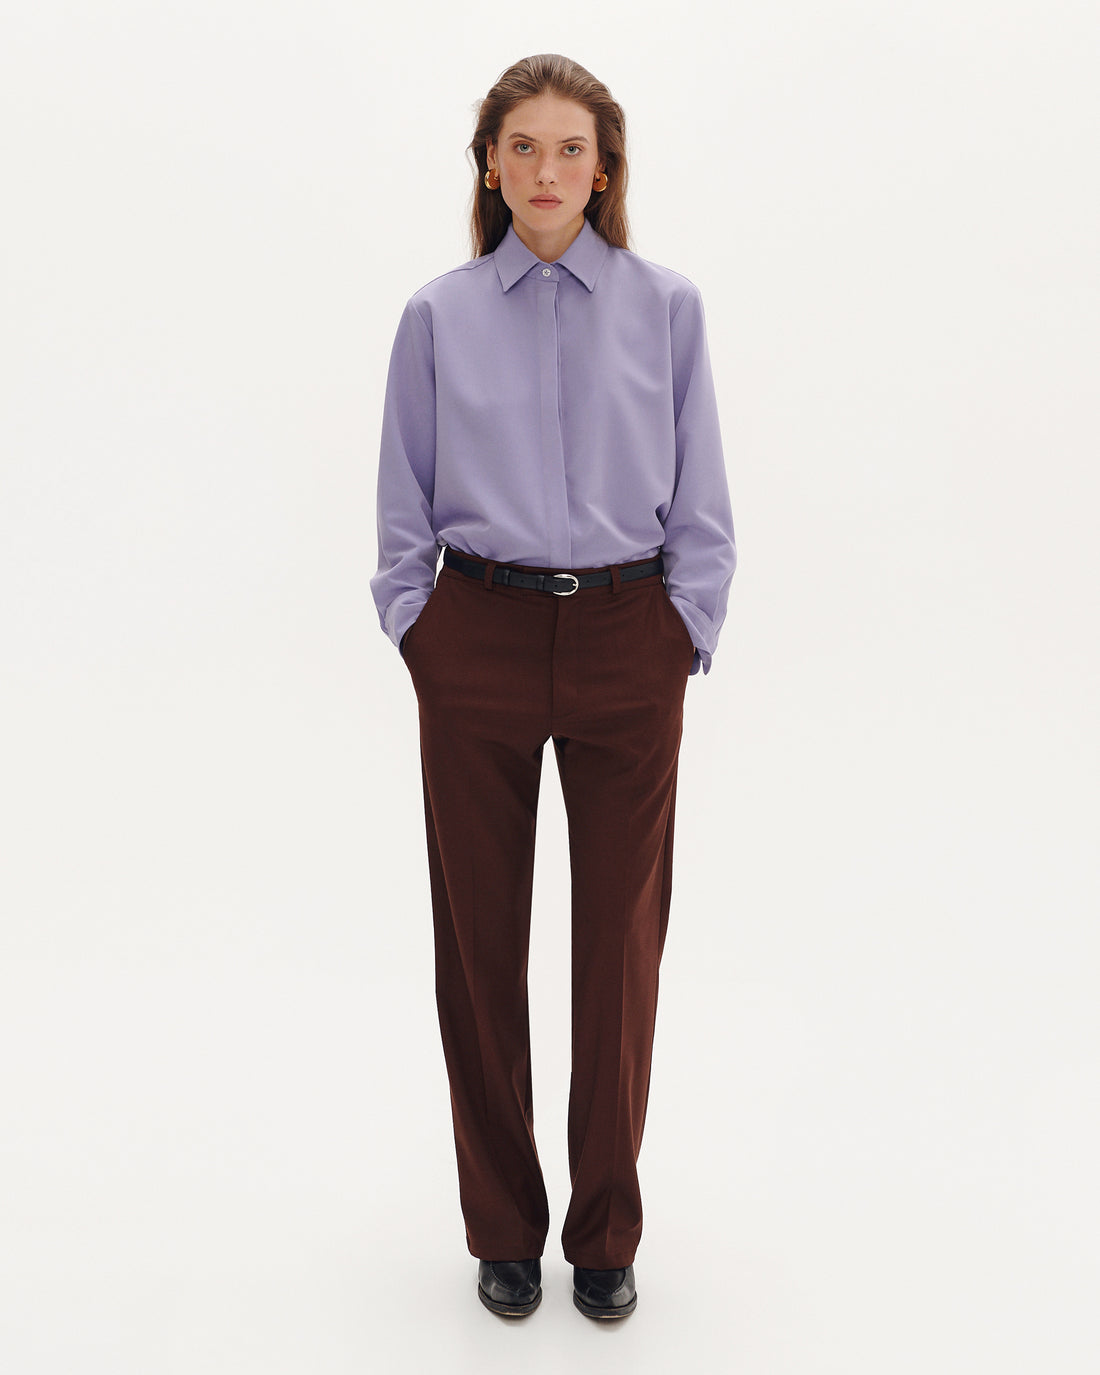 Classic brown trousers